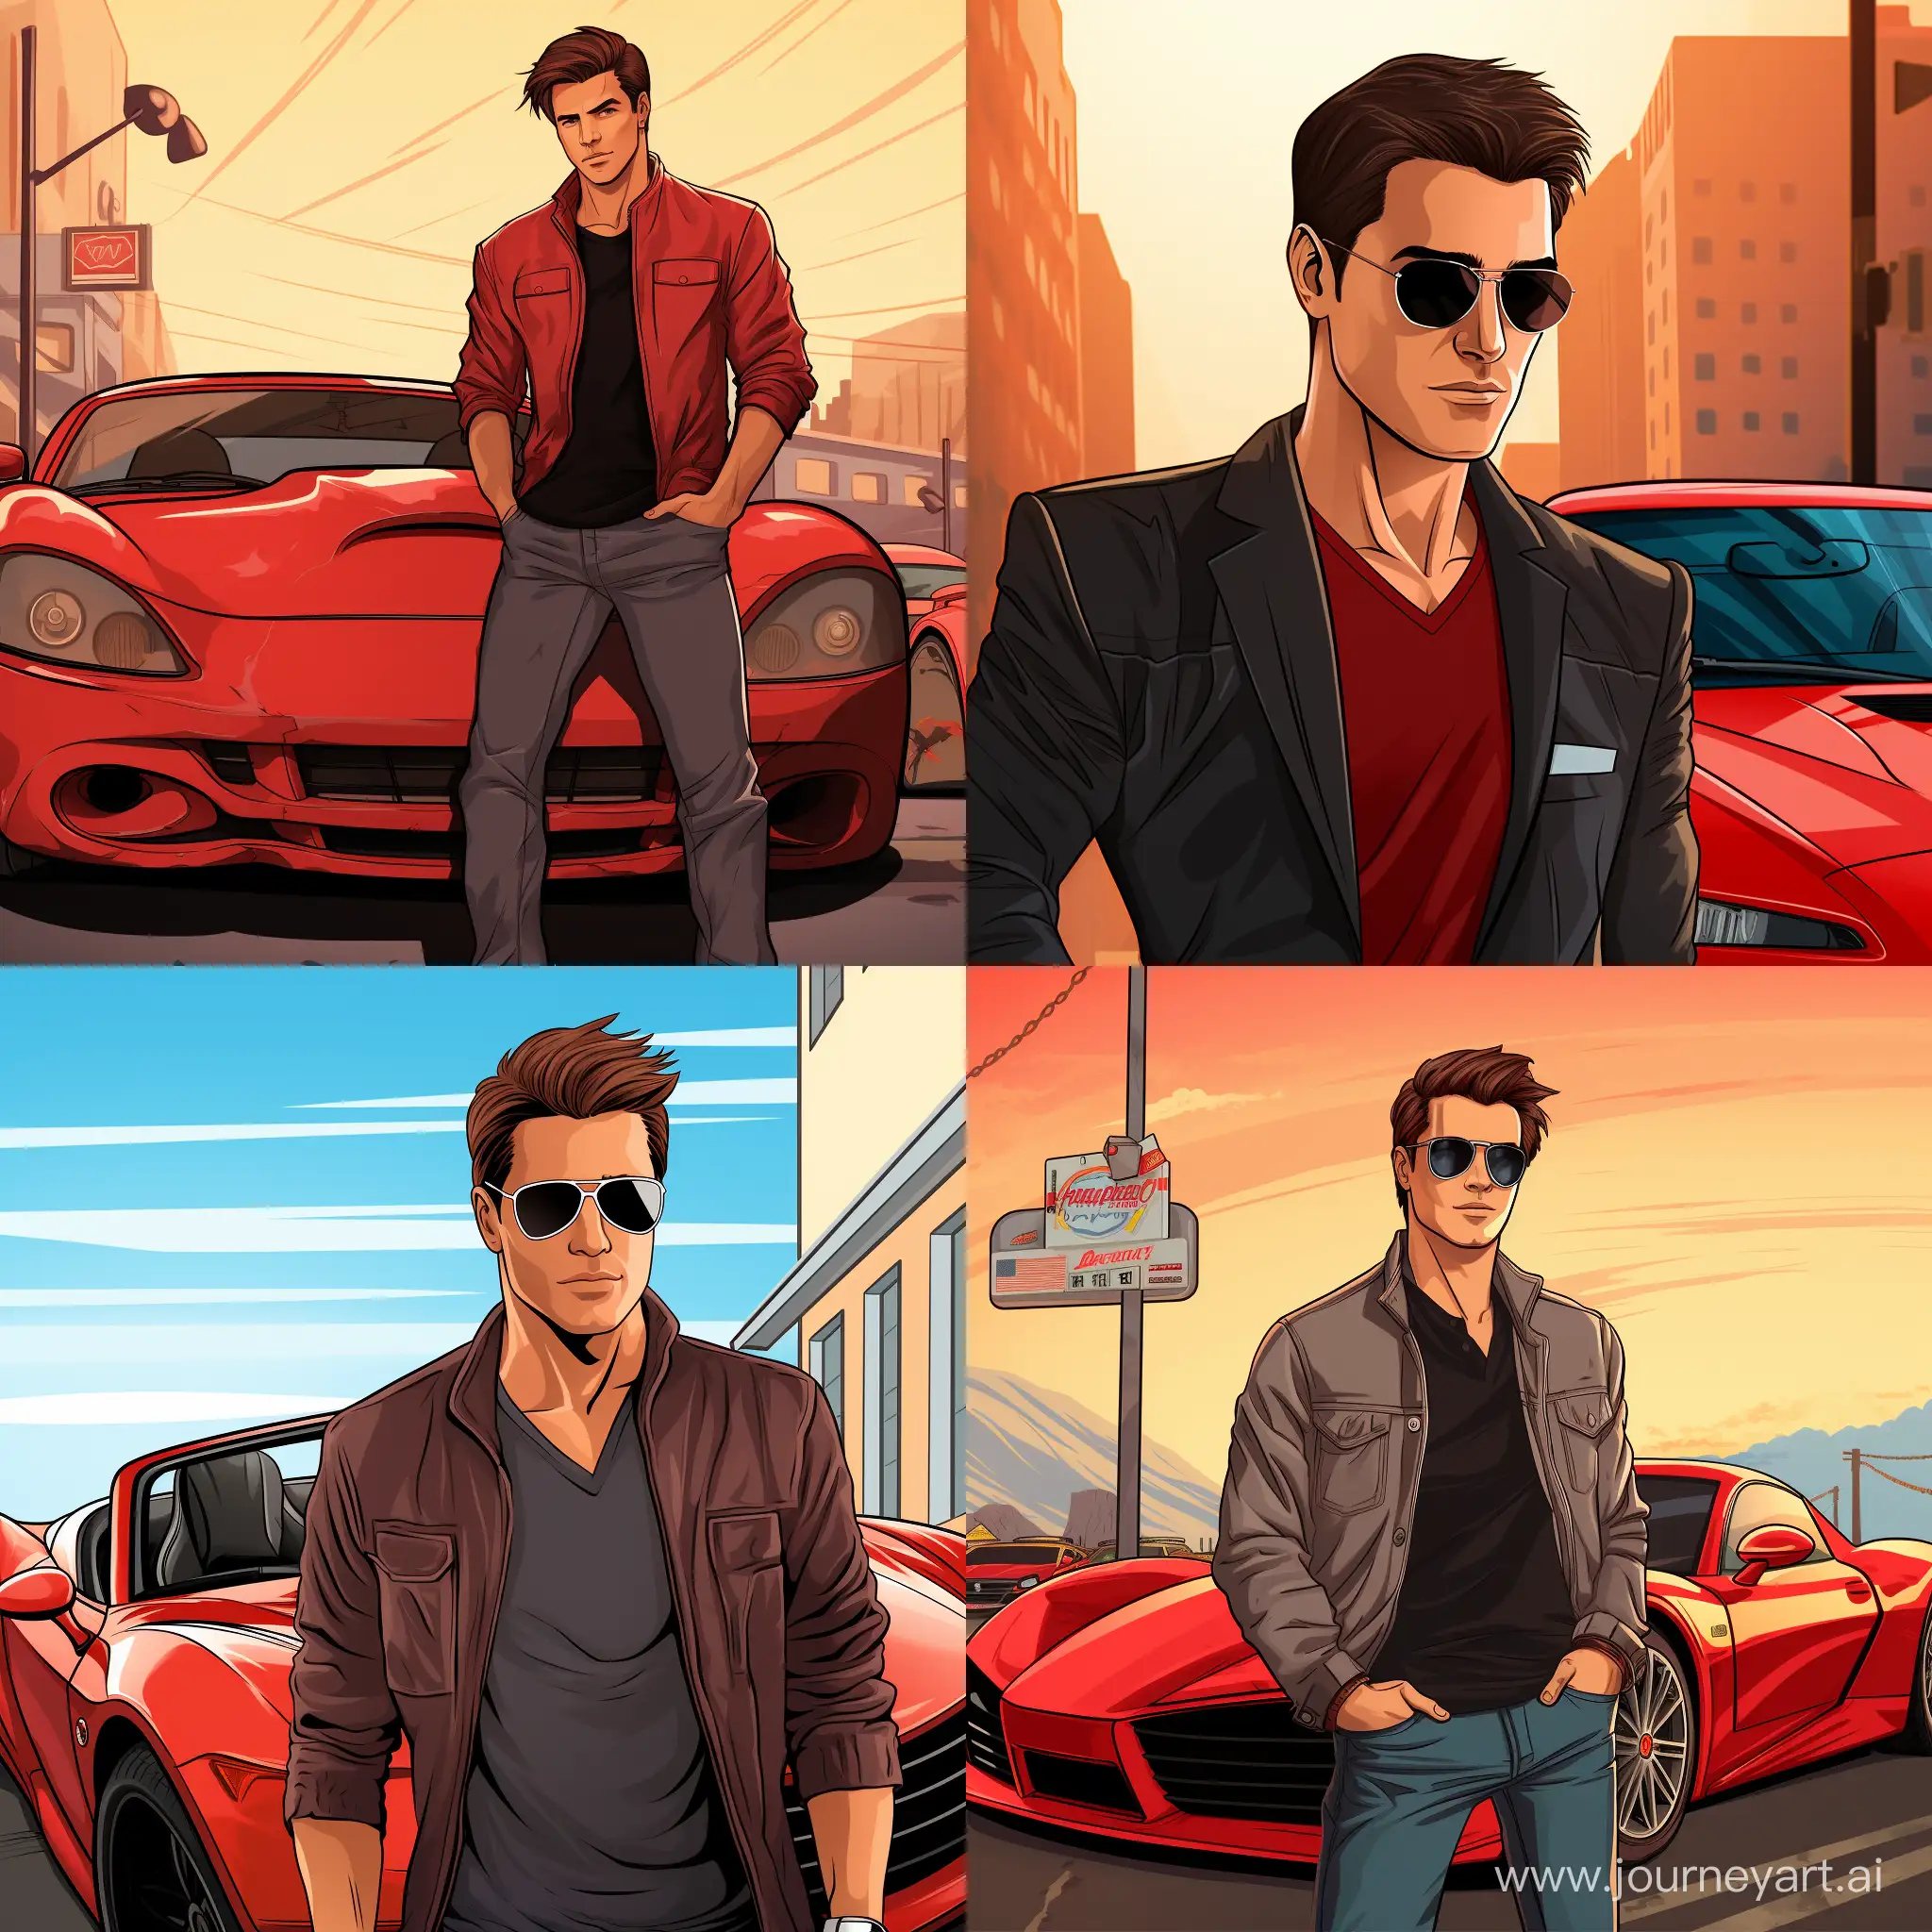 Tom-Cruise-Coolly-Leaning-on-a-Stylish-Red-Ferrari-Cartoon-Style-Illustration